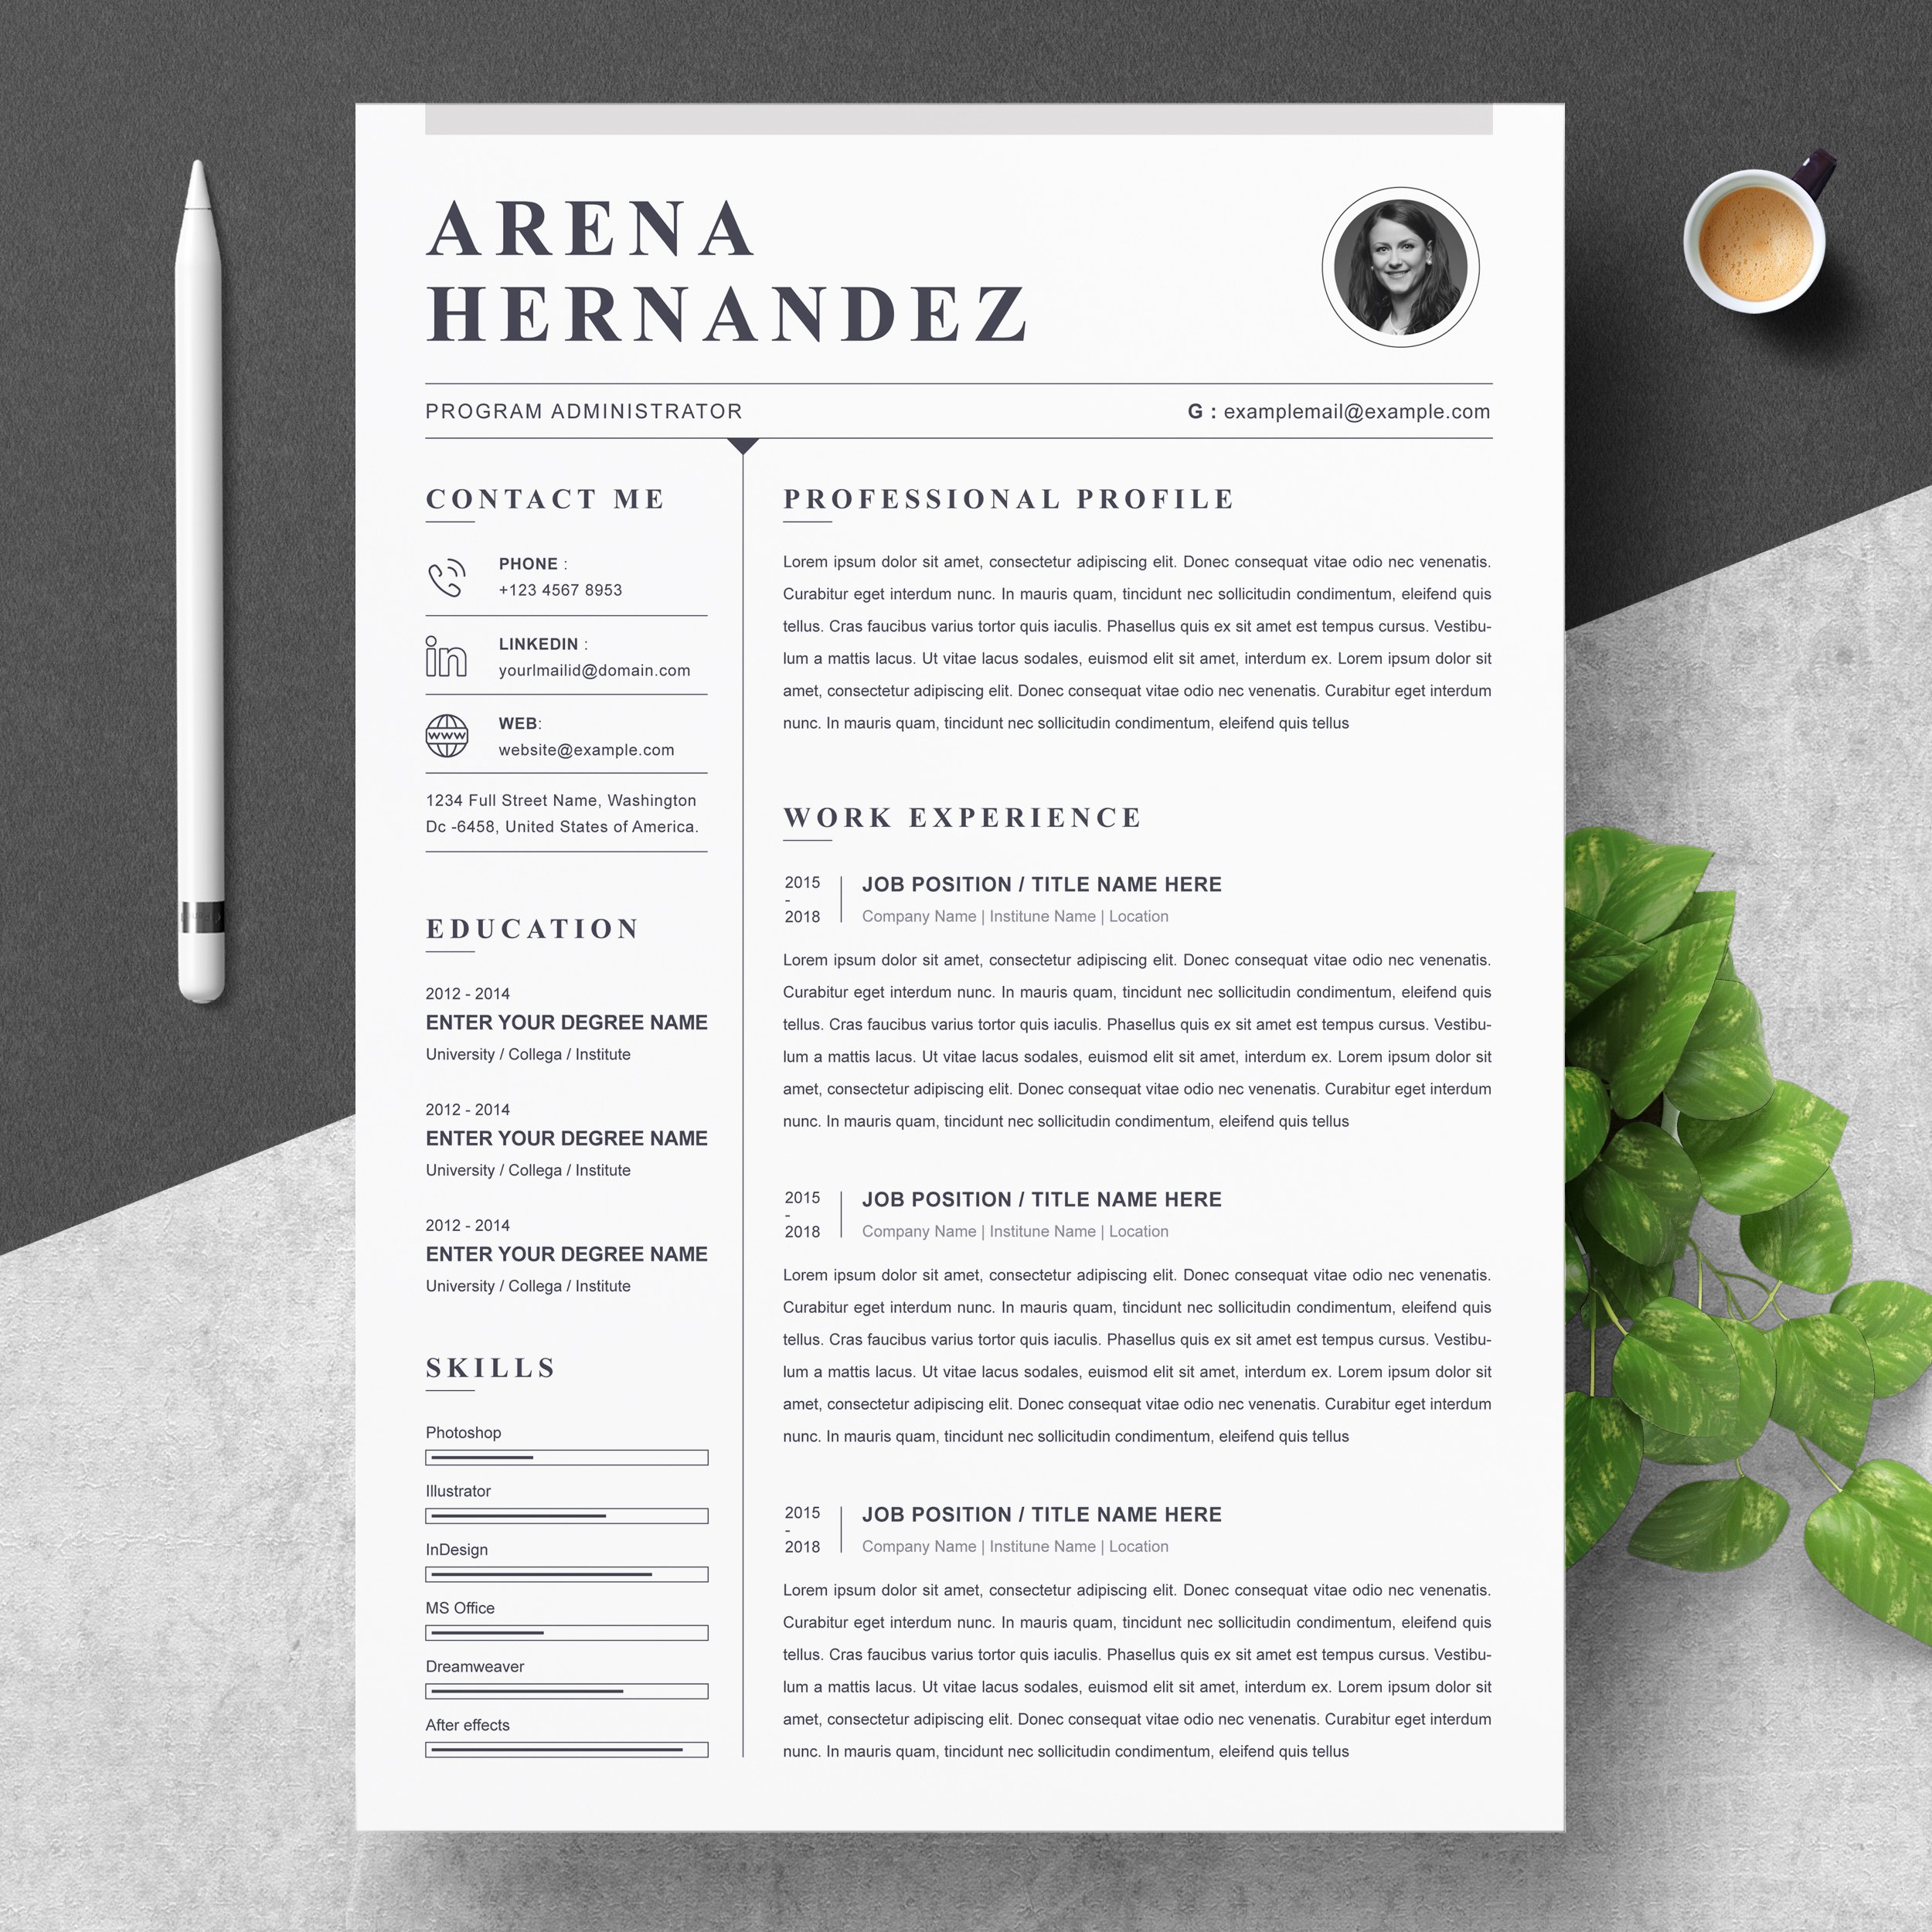 Resume Format 2021 / 3 Best Resume Formats For 2021 W Templates ...